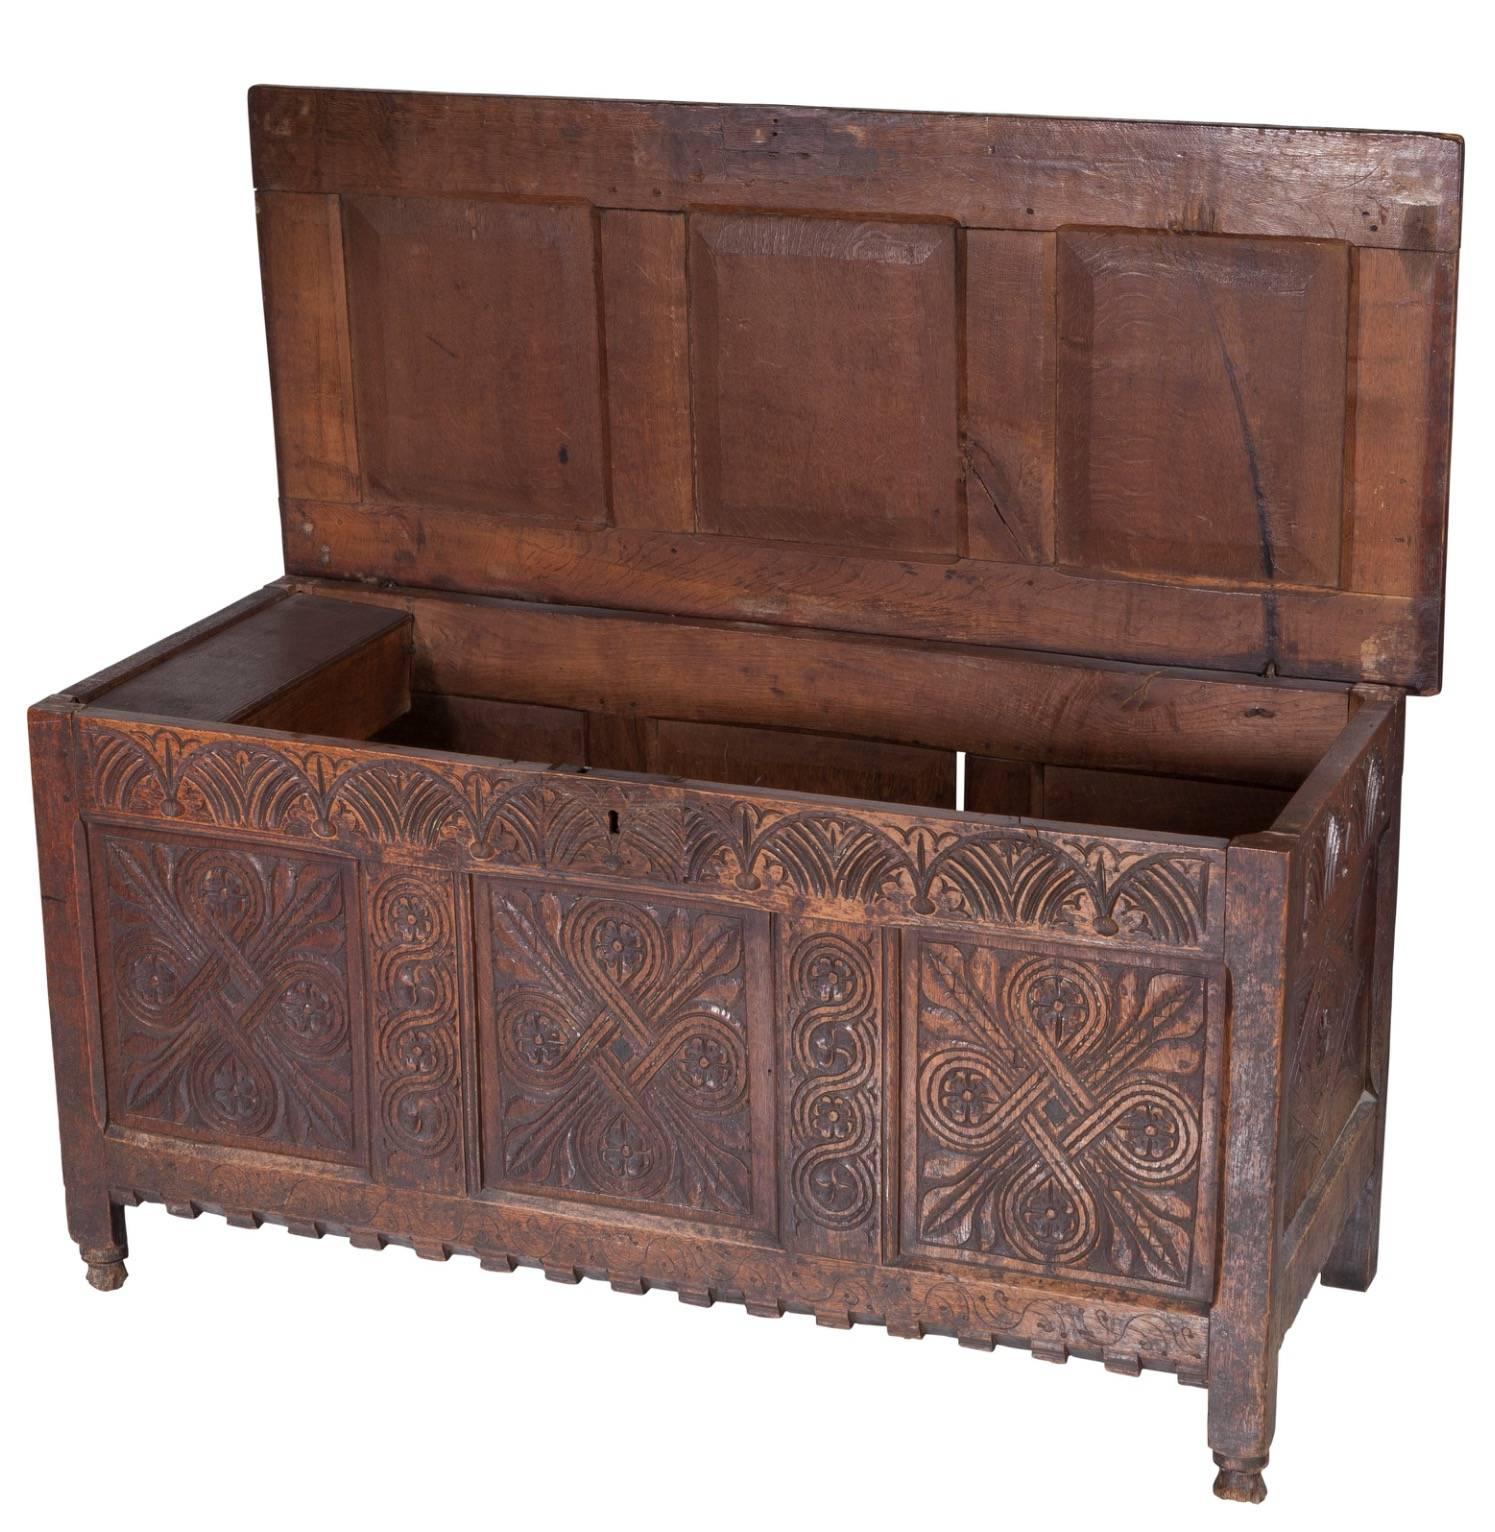 A Jacobean carved oak blanket chest, 17th century and later. Iron hinges.
Measures: 25 inches high x 49 inches wide x 21-1/4 inches deep (63.5 x 124.5 x 54.0 cm).

Property from the estate of Richard D. Bass, Dallas, Texas. 

Condition